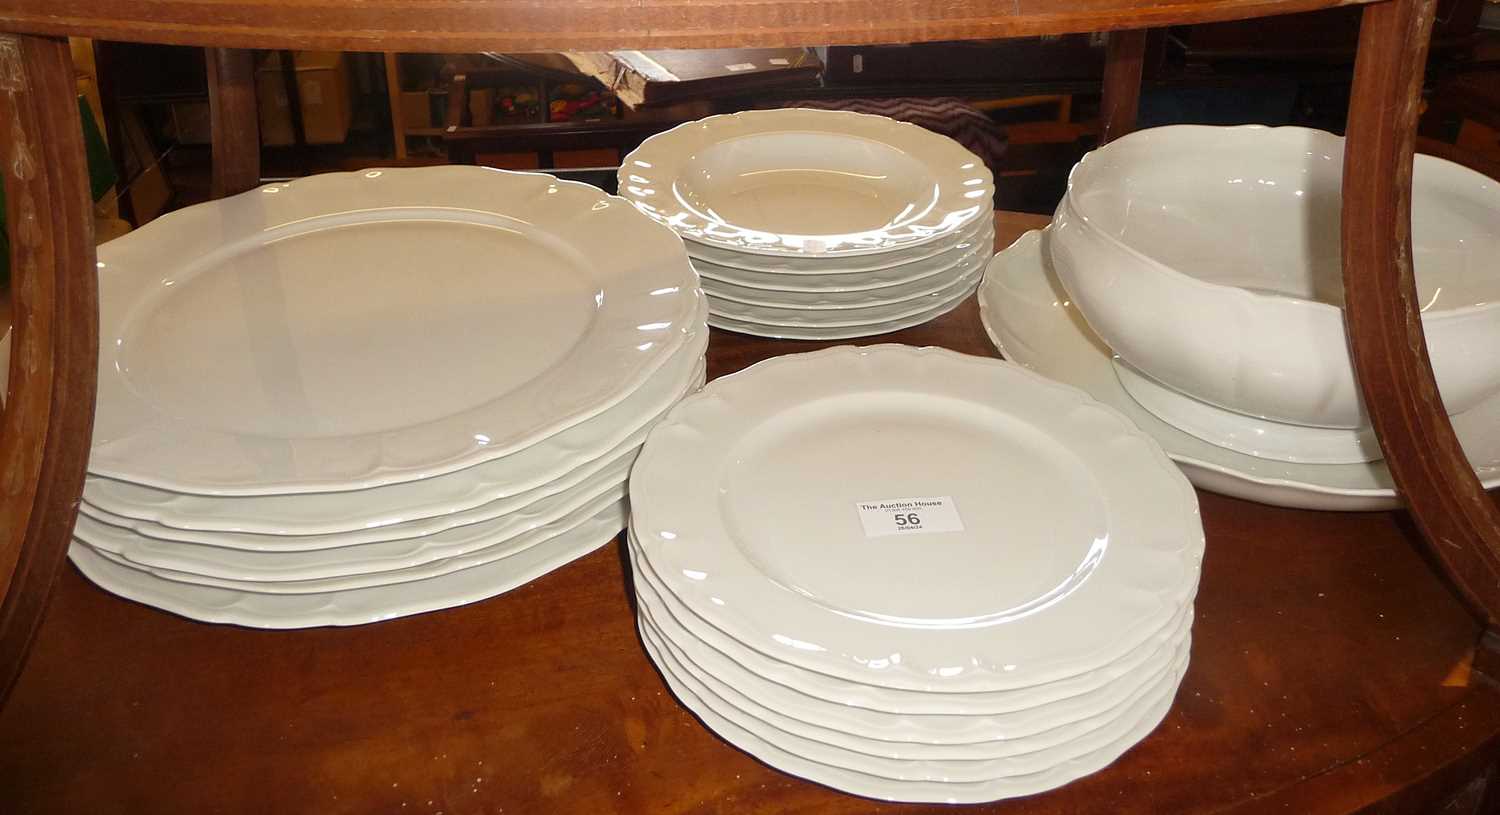 Limoges white porcelain dinner plates and bowls with soup tureen